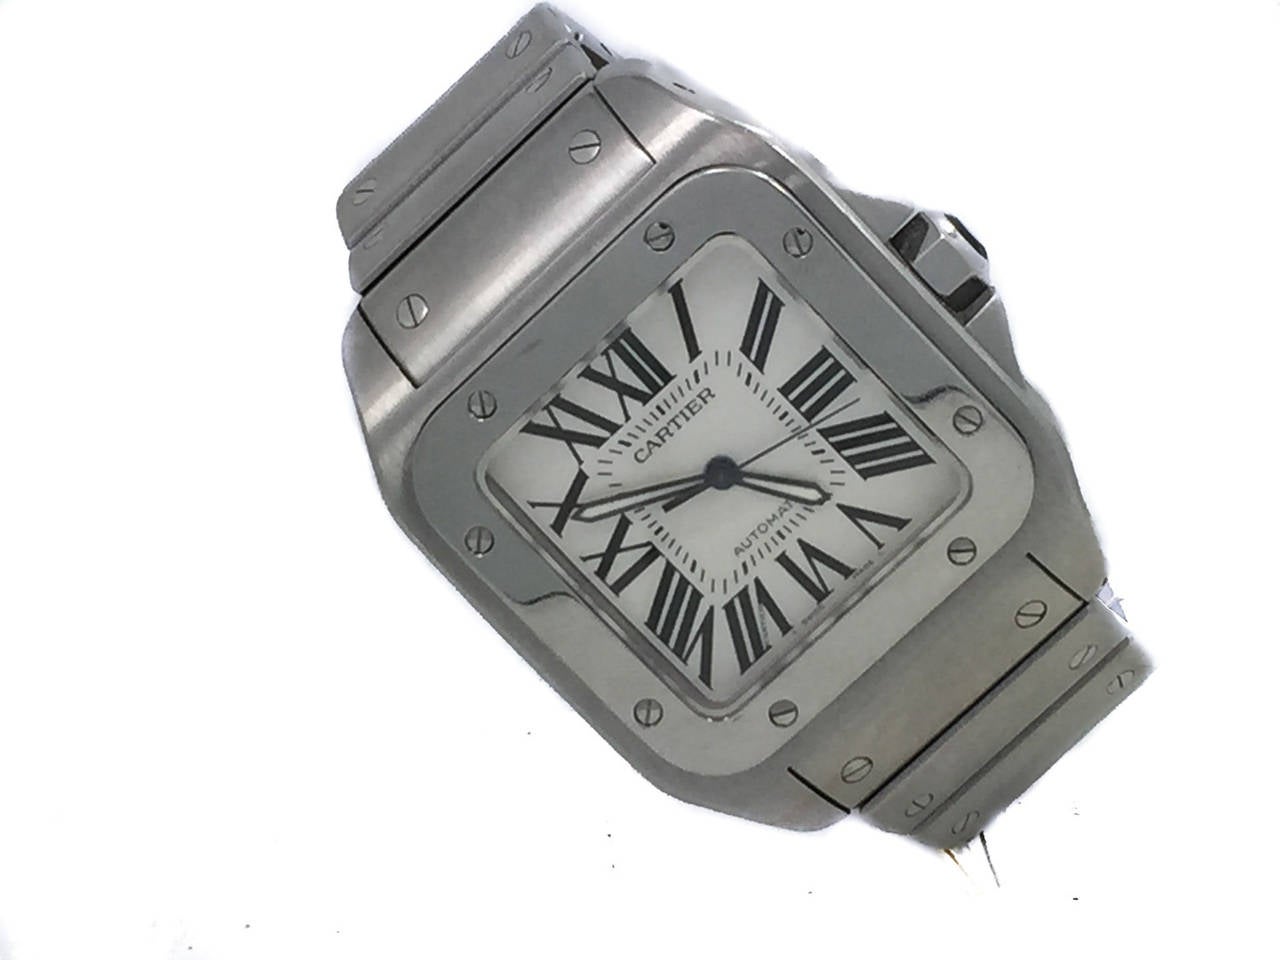 Mens Cartier Santos 100 Large on Bracelet in Stainless Steel, Ref W200737G. The Watch is in Excellent Condition & Keeping Perfect Time, Movement is Operated by Automatic Mechanical Winding. The Watch Bracelet fits up to around a 7 1/2 Inch Wrist. No